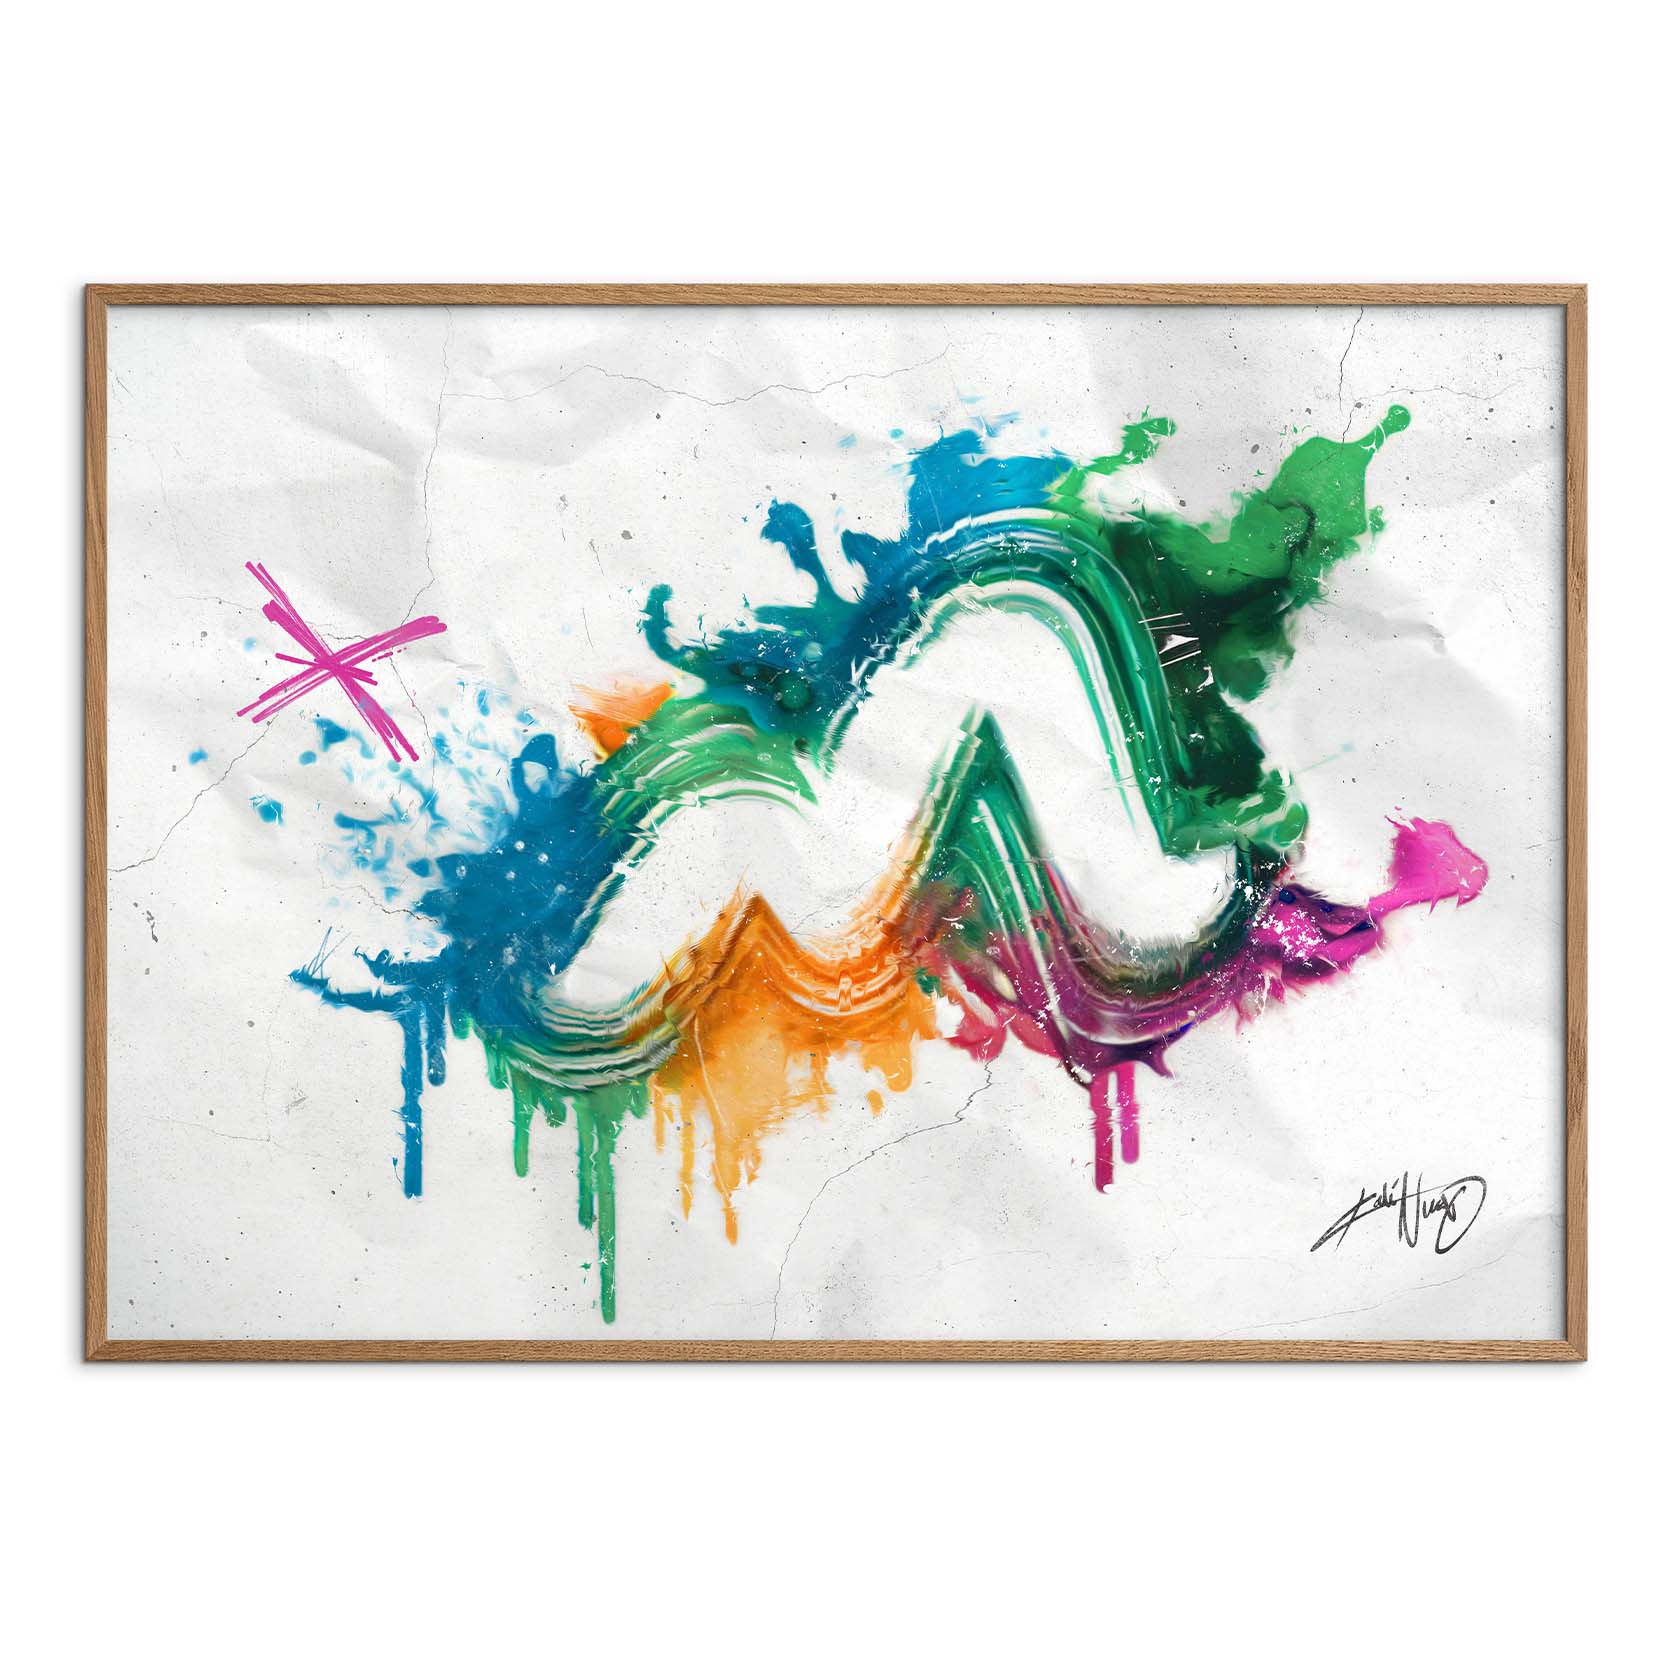 colorful calligraphy abstract art poster in a wooden frame on a white background